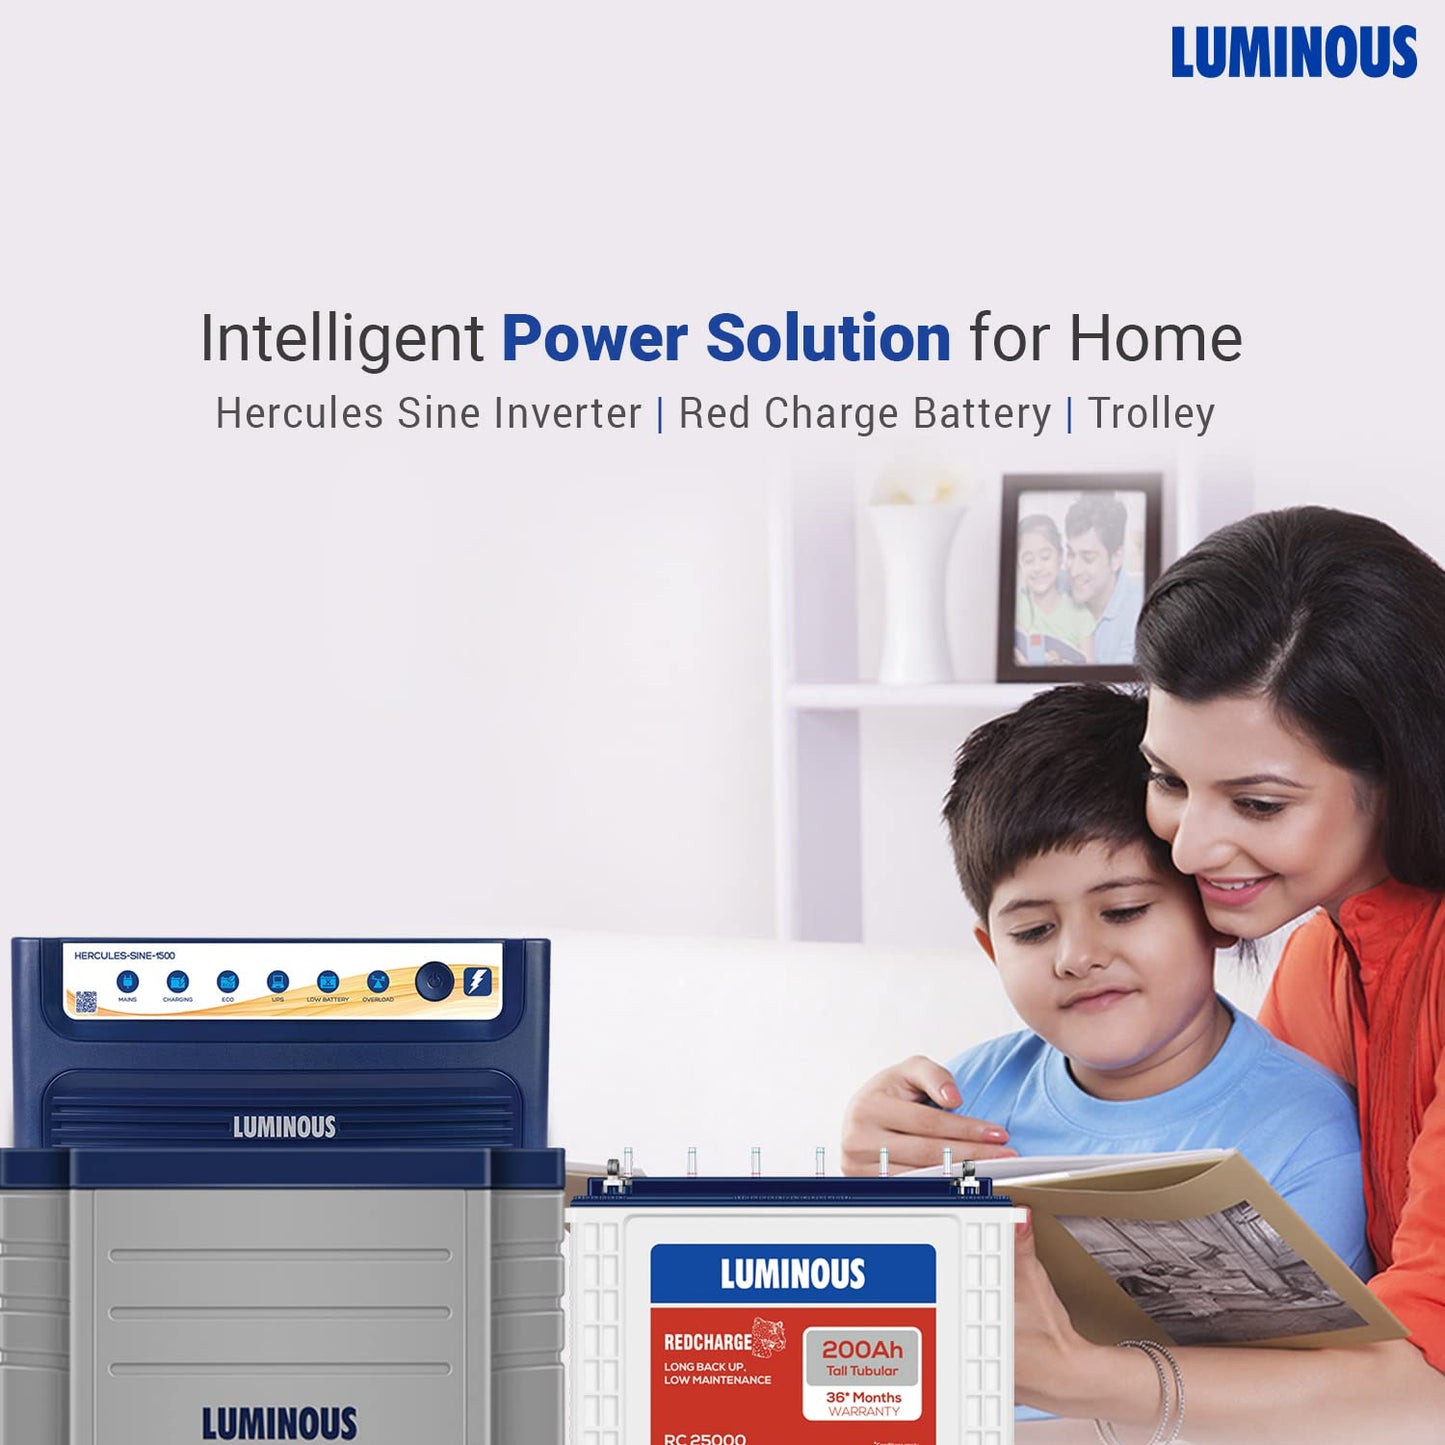 Luminous Hercules Sine 1500 Sine Wave Inverter 1400VA 12V with RC25000 Battery 200Ah and Trolley